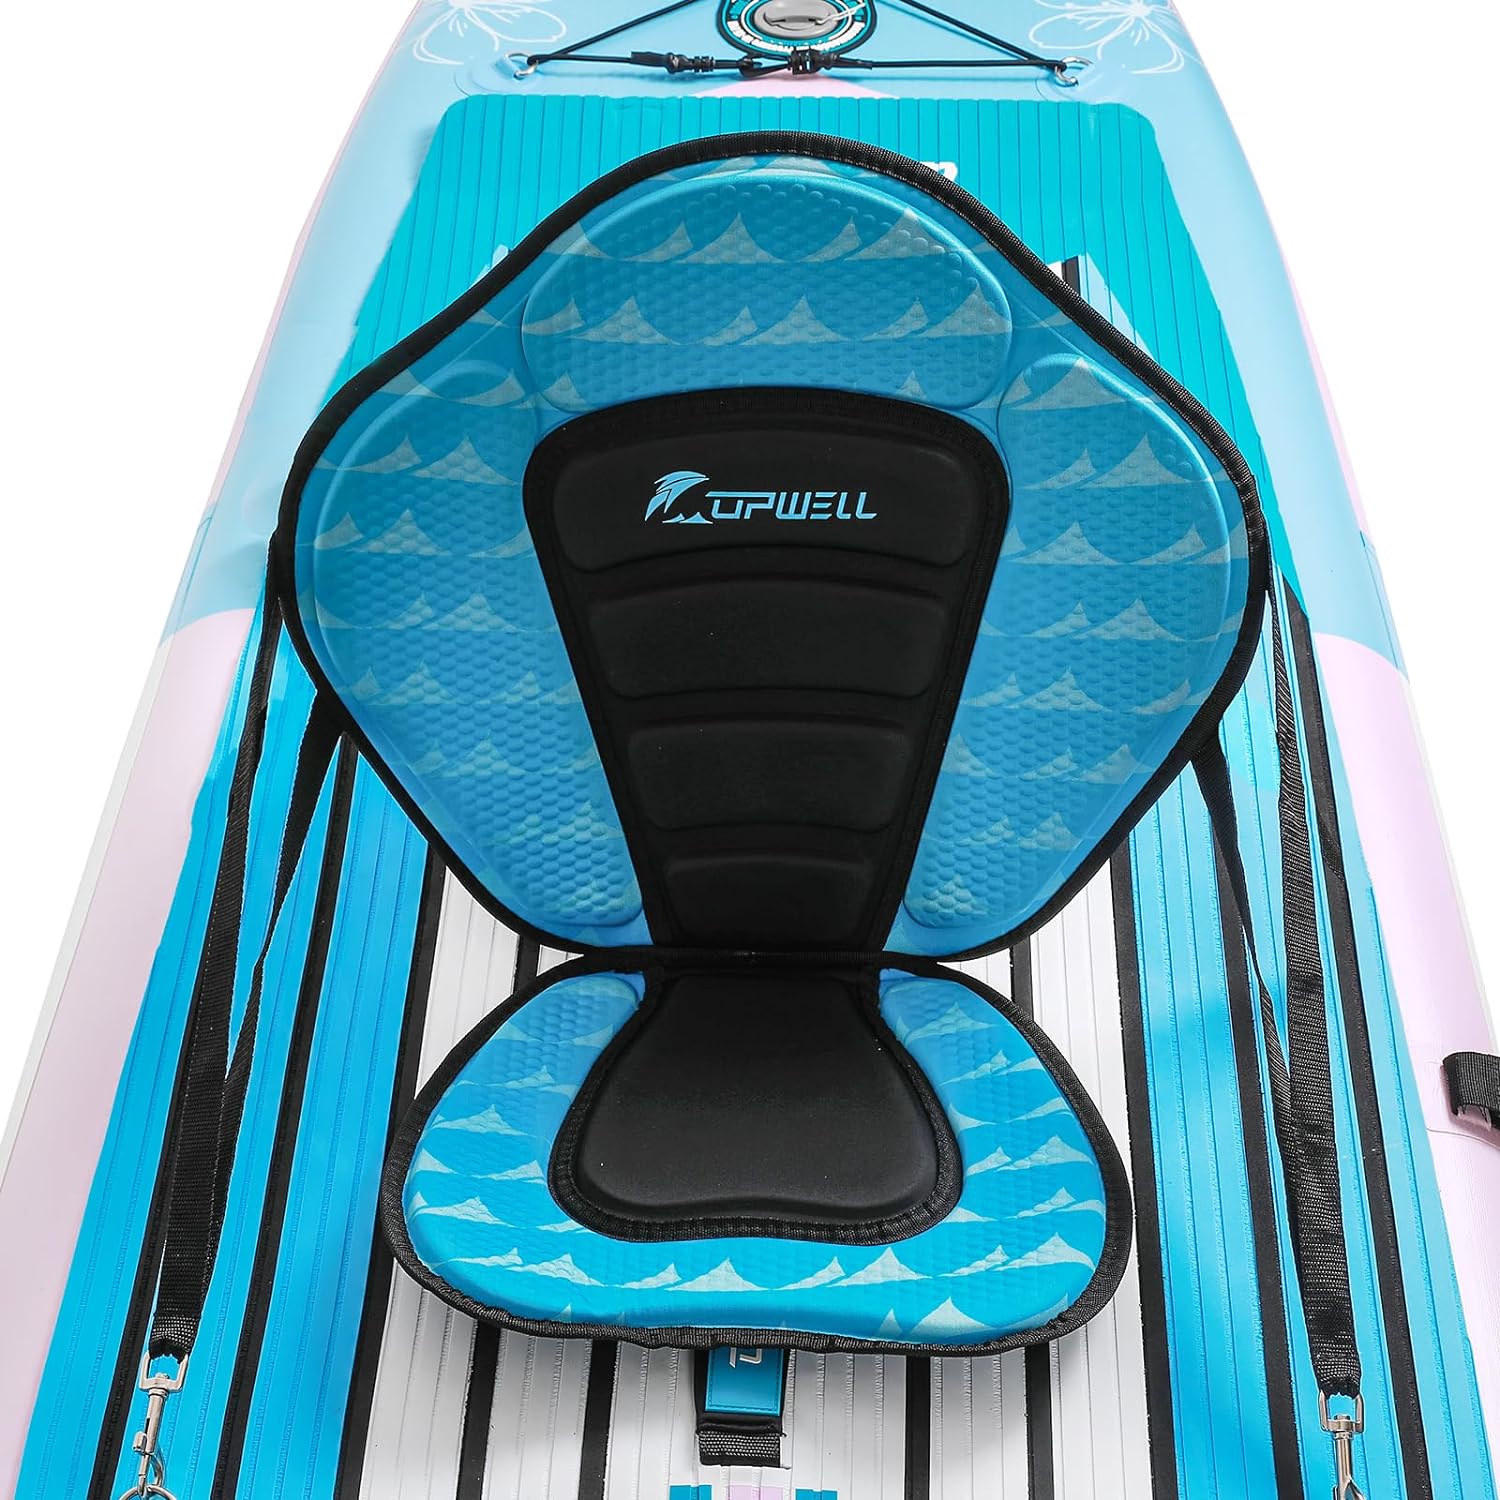 UPWELL Inflatable Paddle Board Seat Review